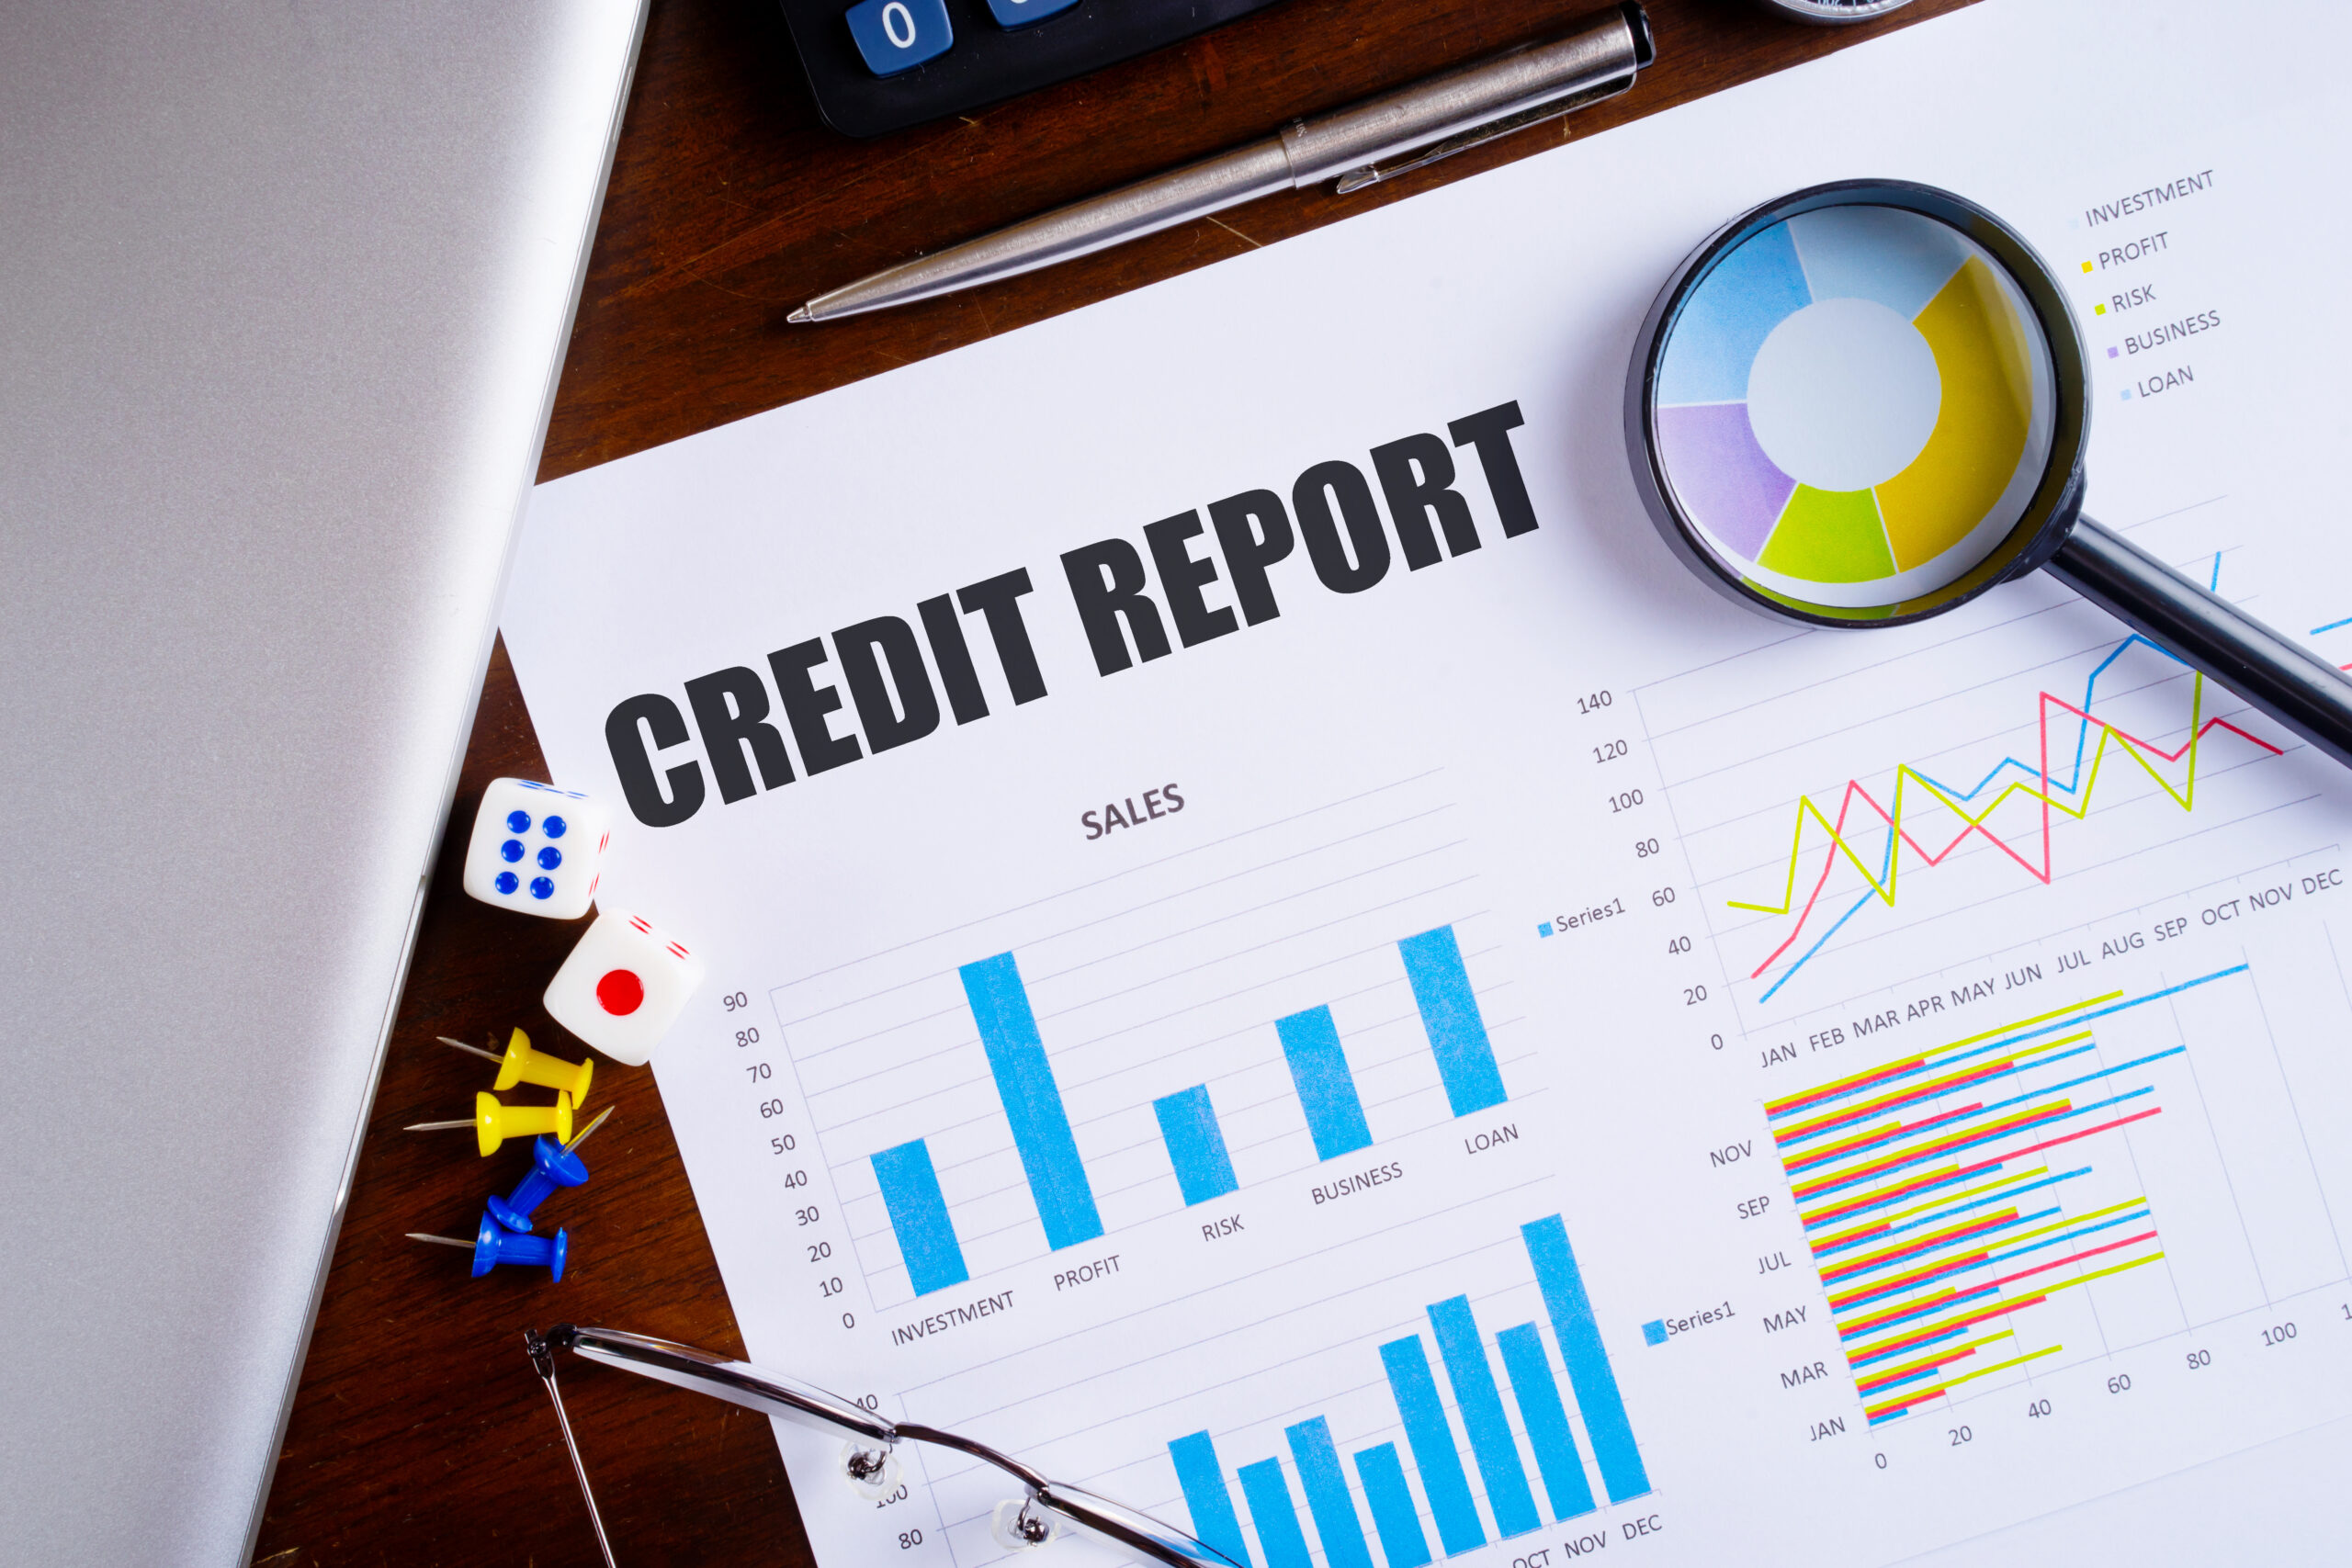 3 R’s Of Credit Reporting: Rights, Responsibilities, And Recourse